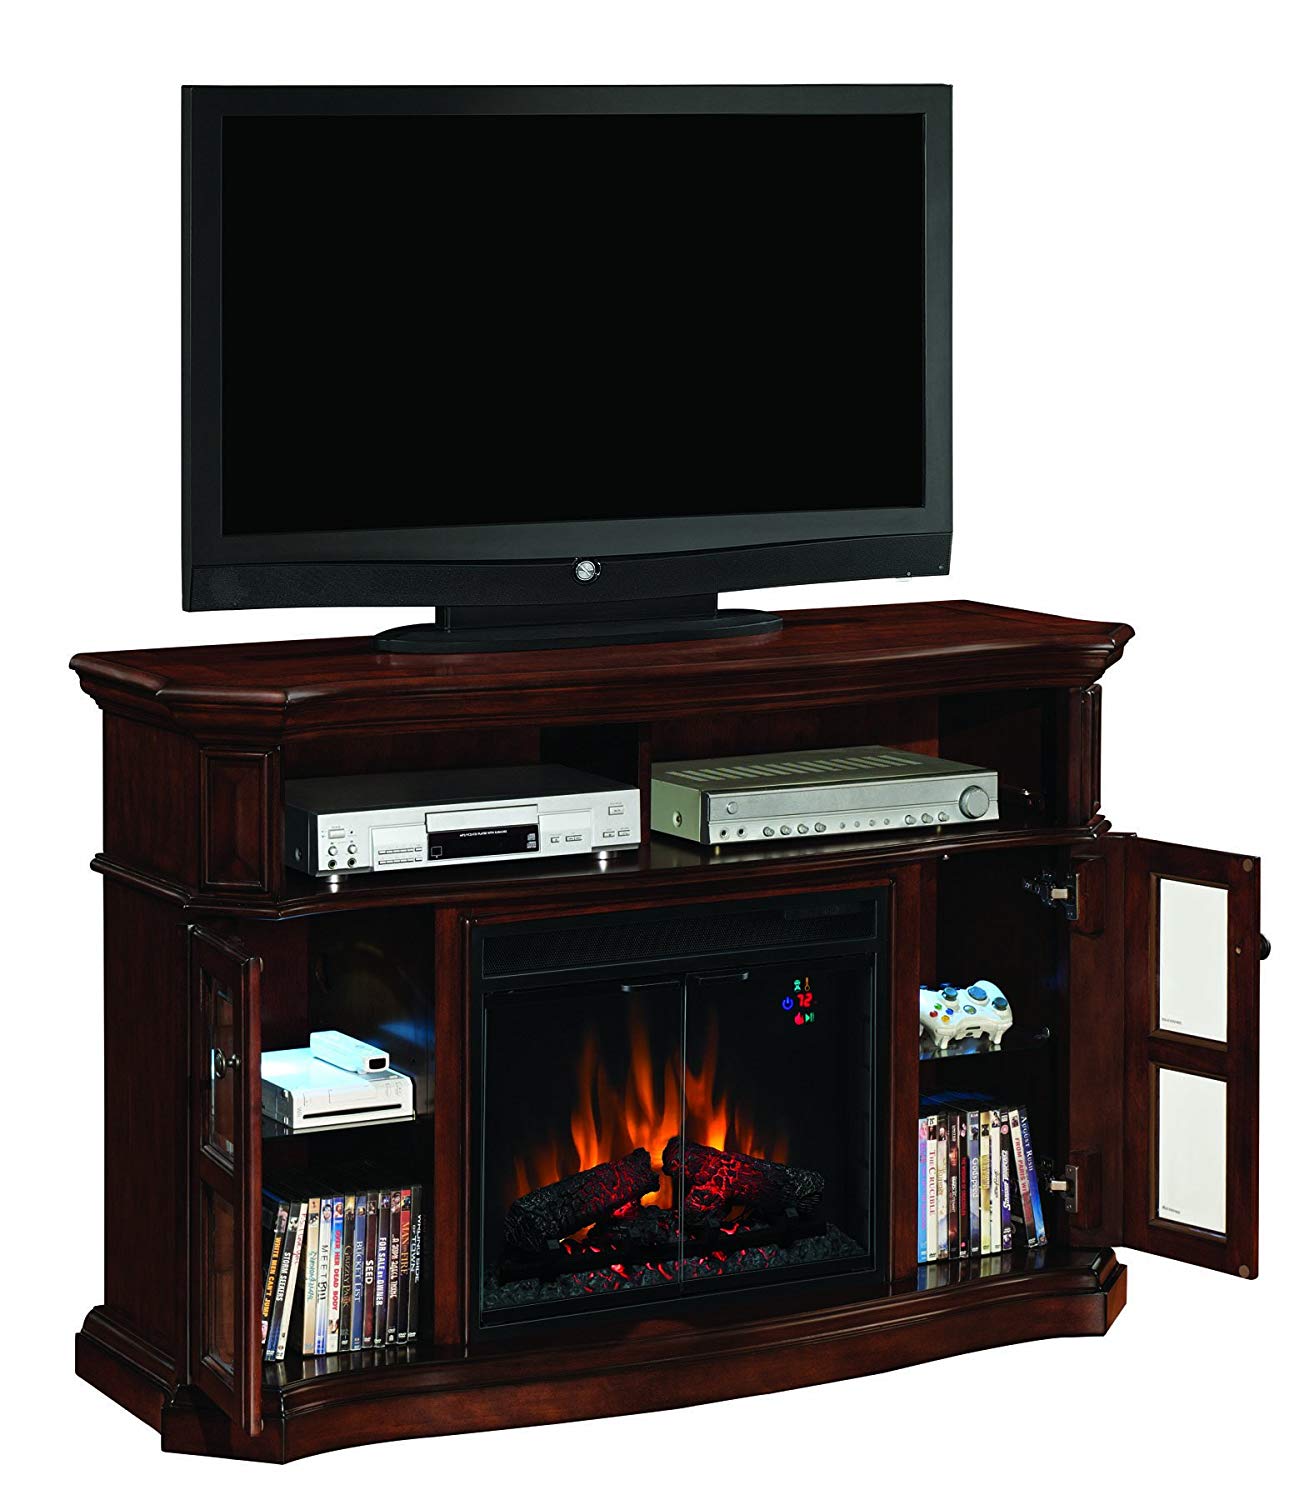 Tresanti Fireplace Console Awesome Classic Flame 23mm1297 C259 Aberdeen Media Electric Fireplace